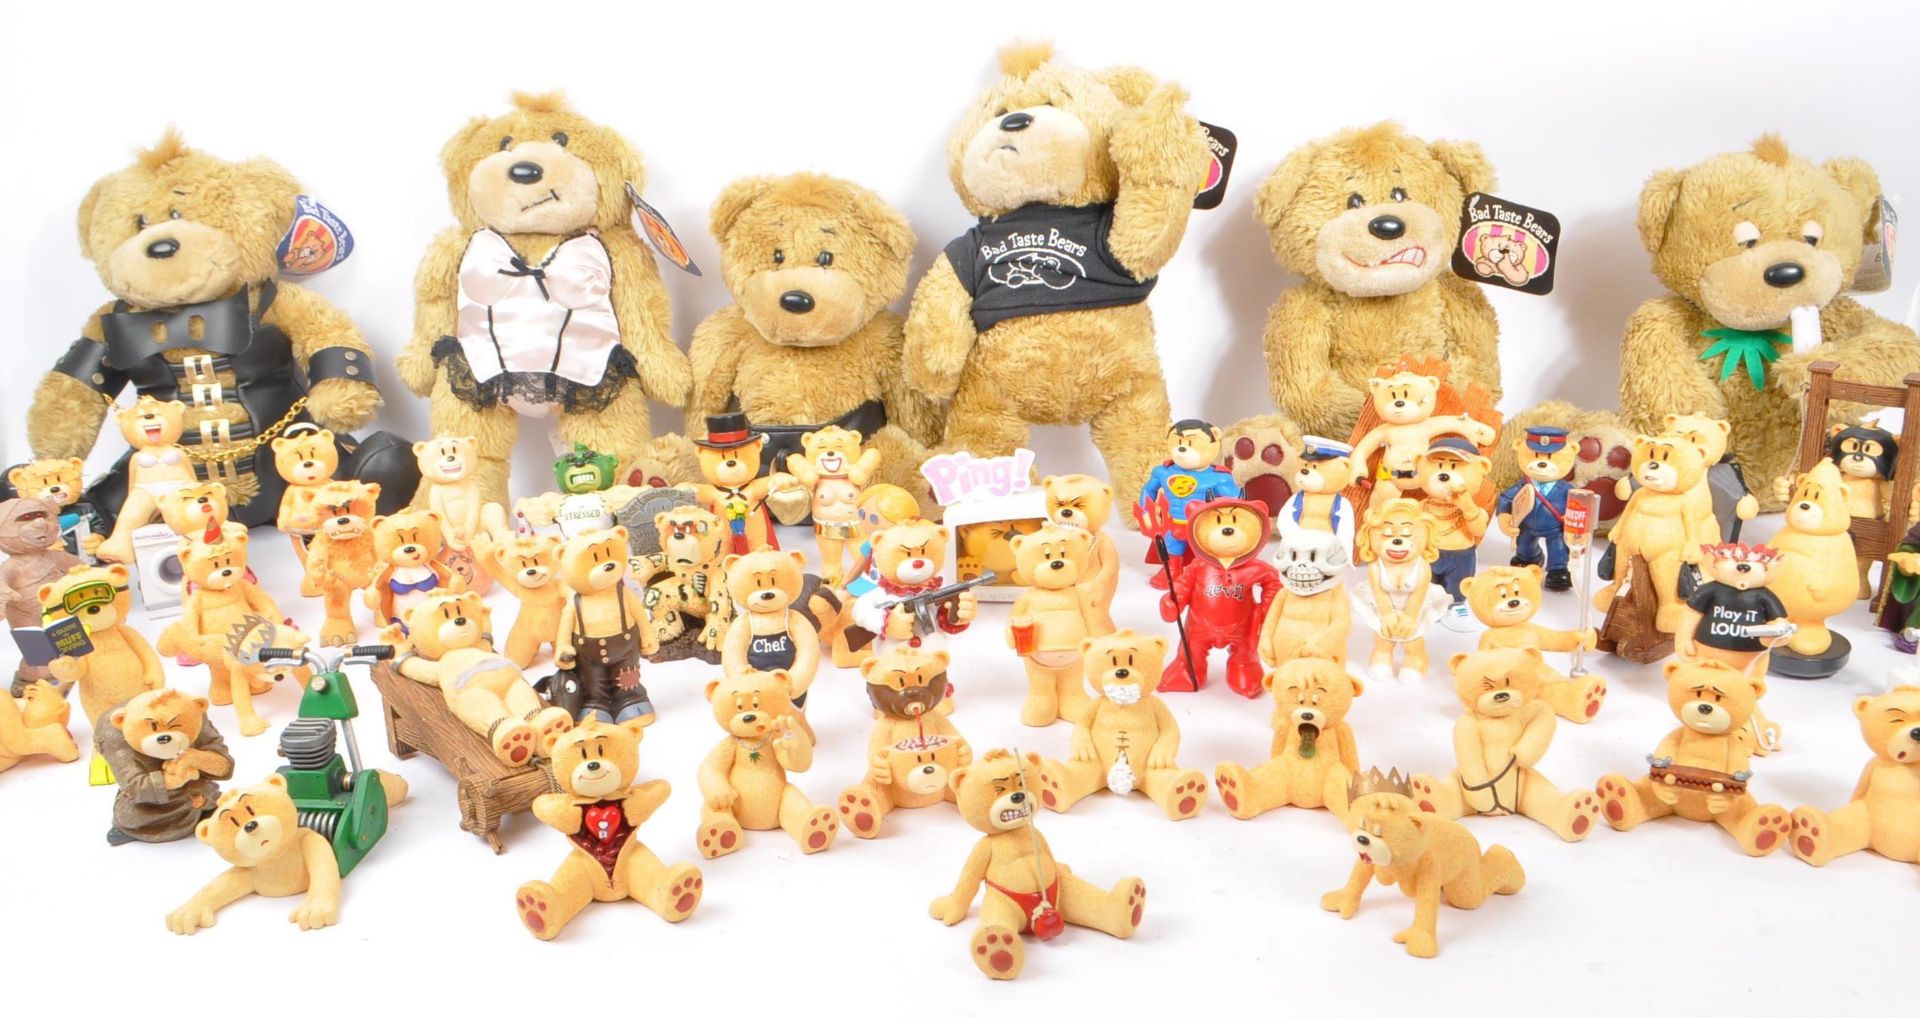 LARGE COLLECTION OF BAD TASTE BEARS FIGURINES